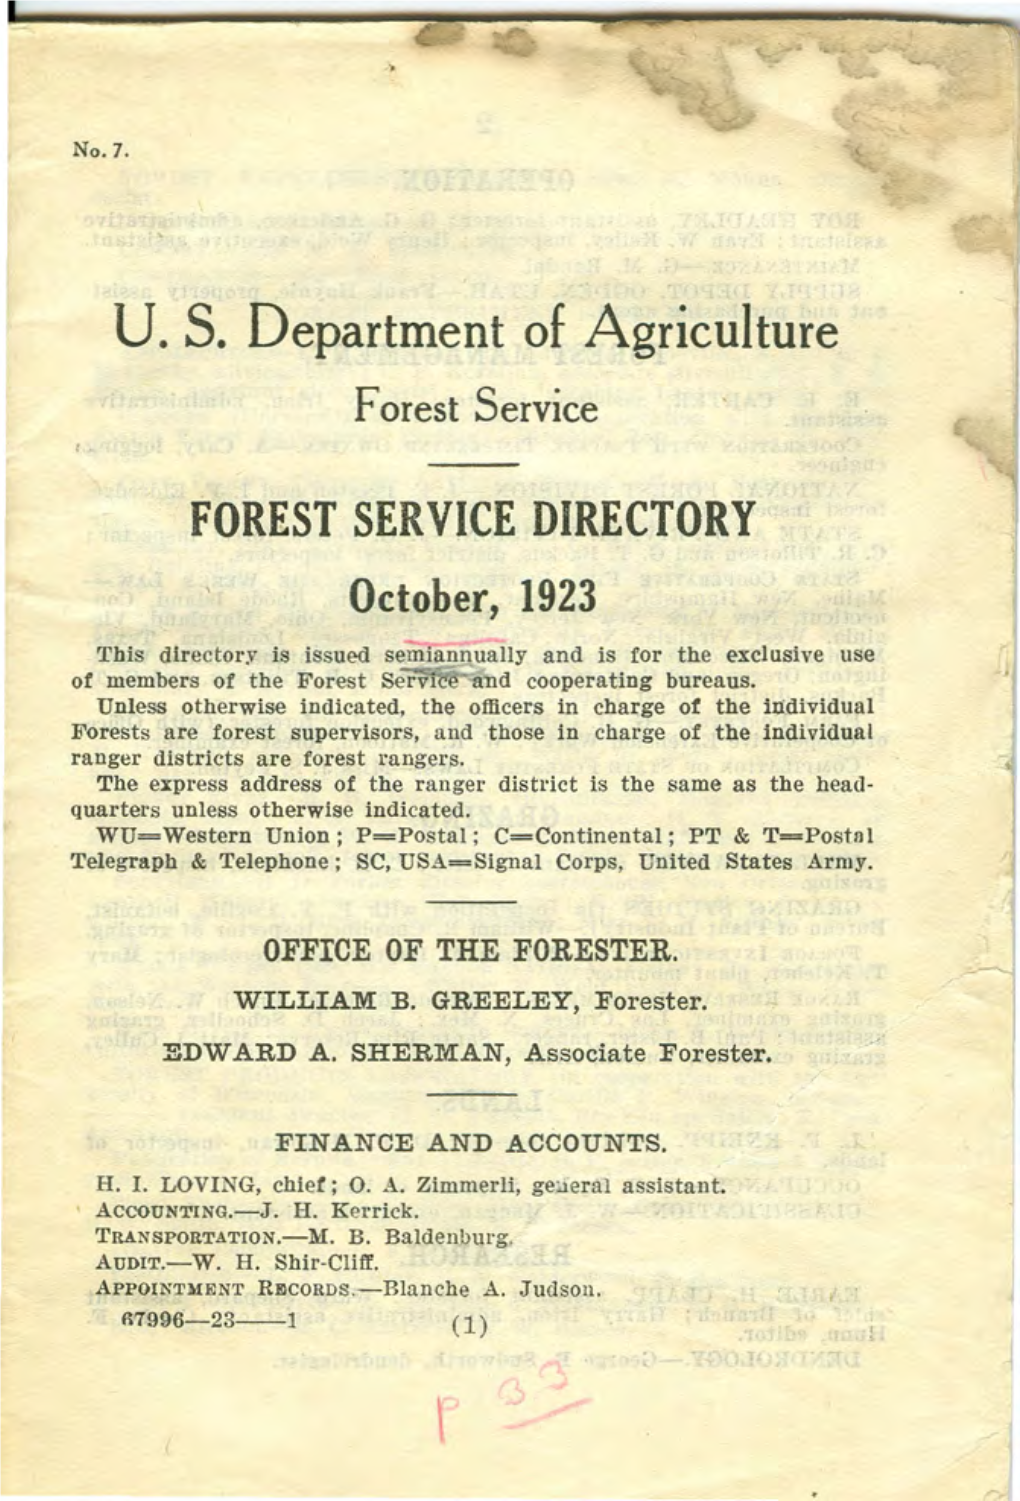 FOREST SERVICE DIRECTORY October, 1923